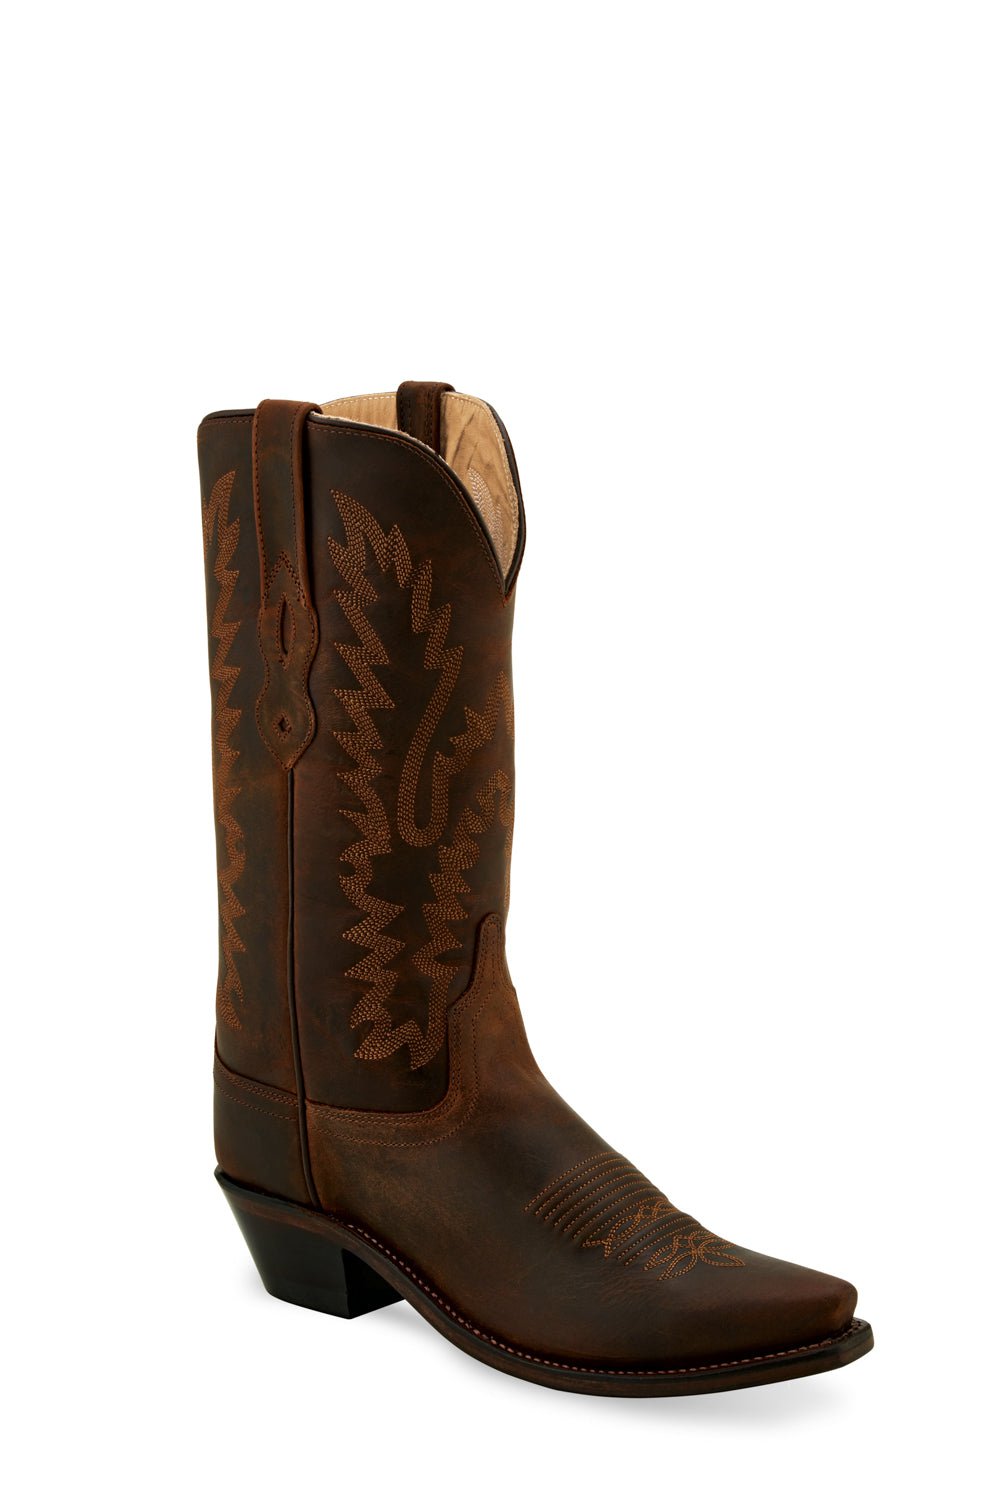 old west boots womens